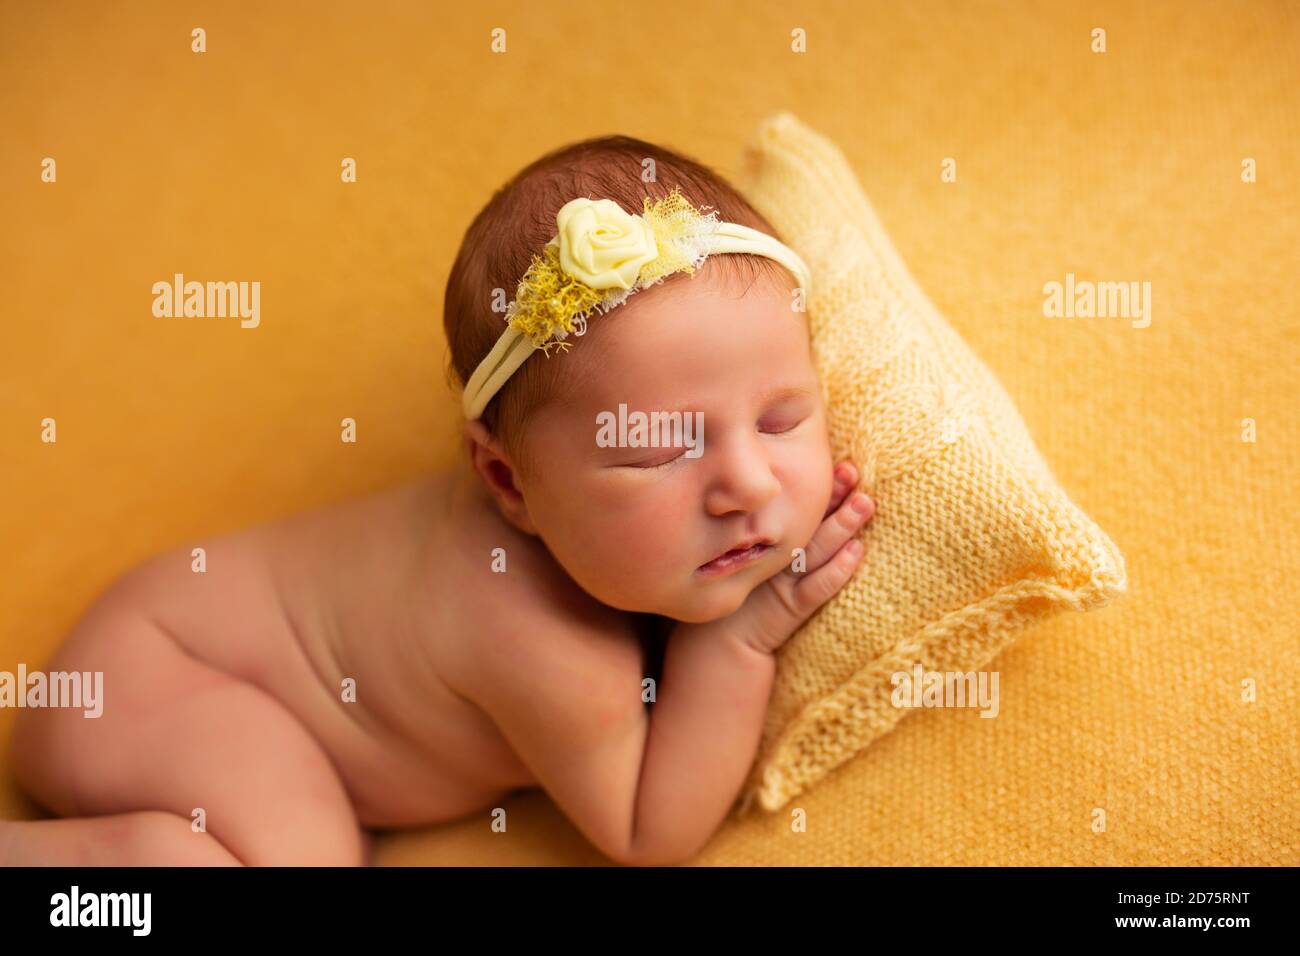 portrait of a beautiful seven day old baby girl. She is sleeping in a curled up fetal position on a yellow blanket Stock Photo